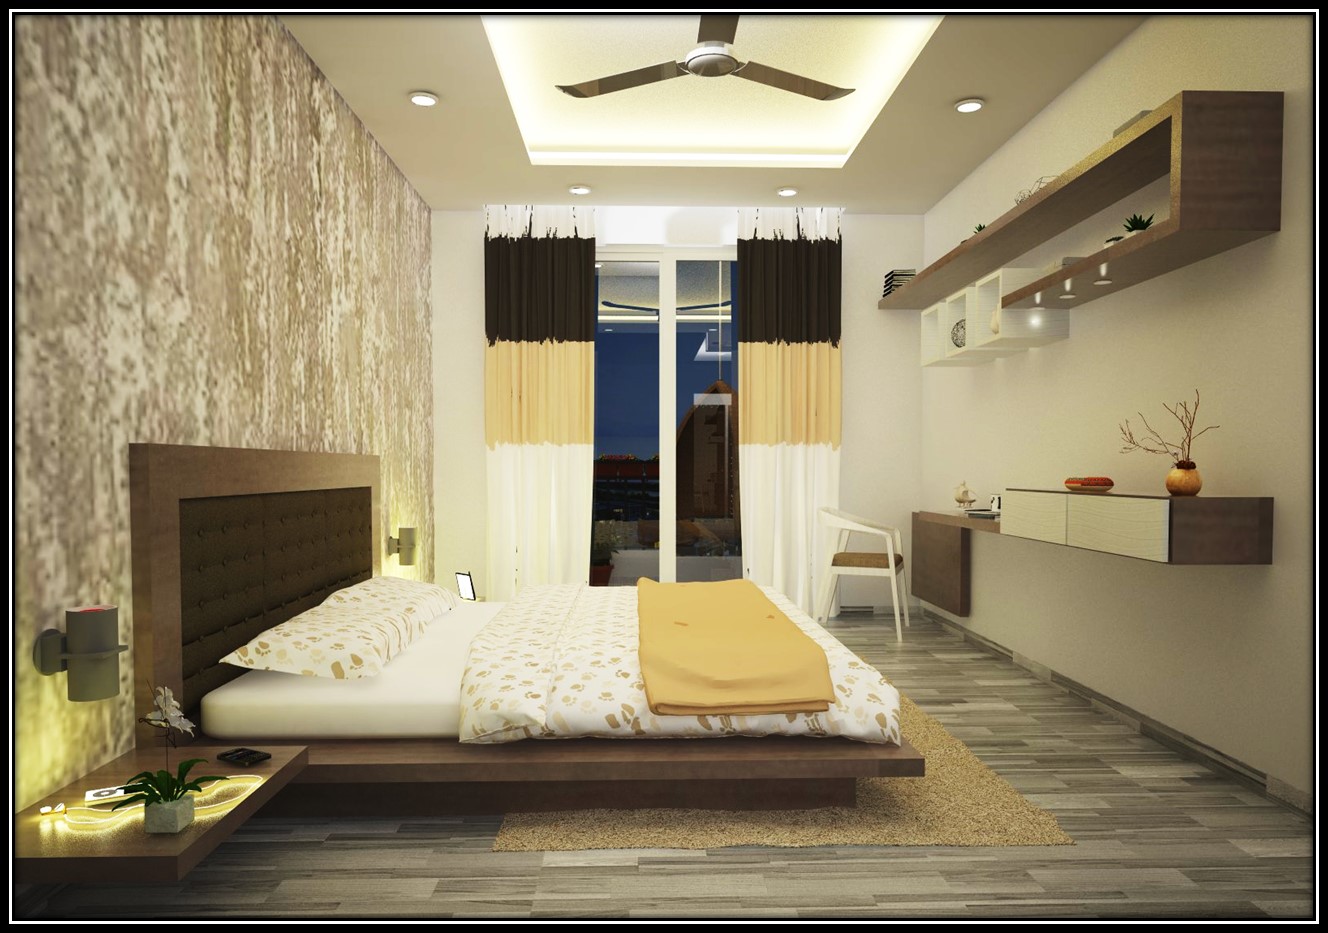 A minimalistic bedroom design from Abode & Beyond